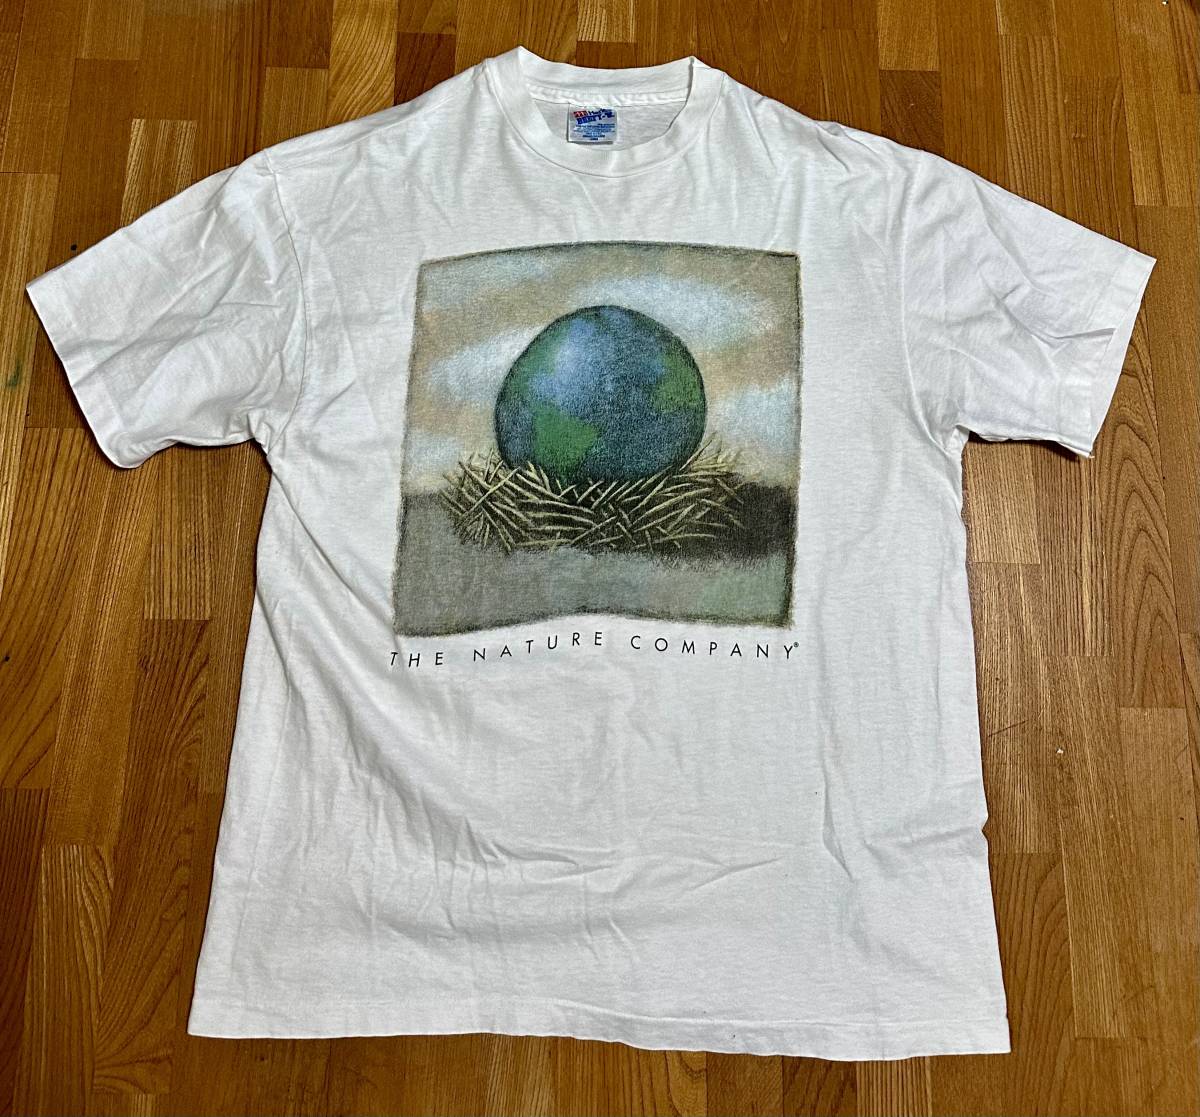 90's vintage THE NATURE COMPANY 地球 Tシャツ ヴィンテージ USA製